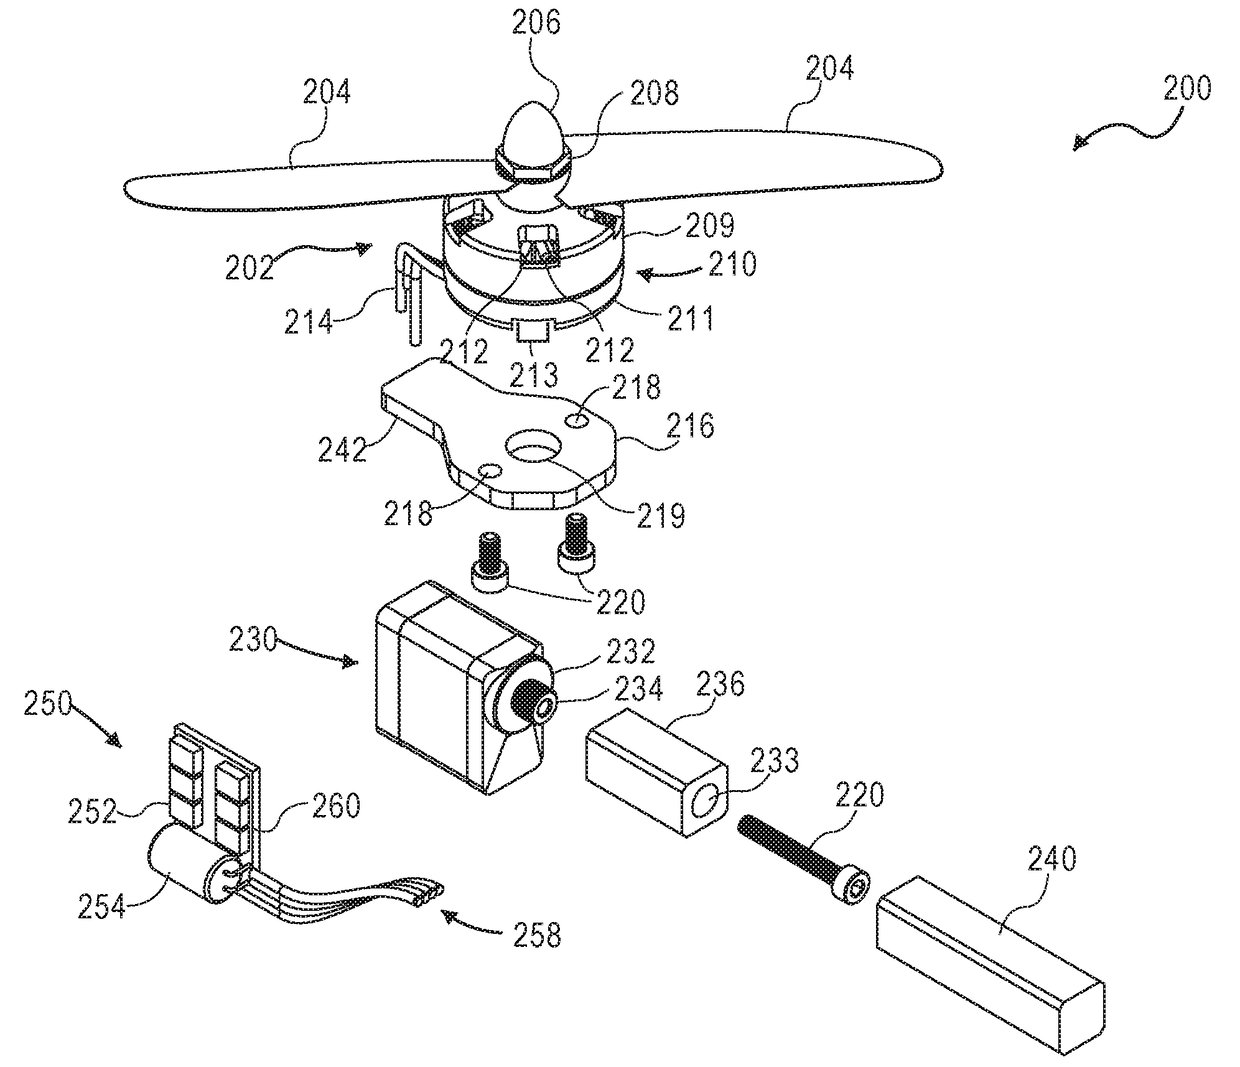 Gimbaled thruster configuration for use with unmanned aerial vehicle